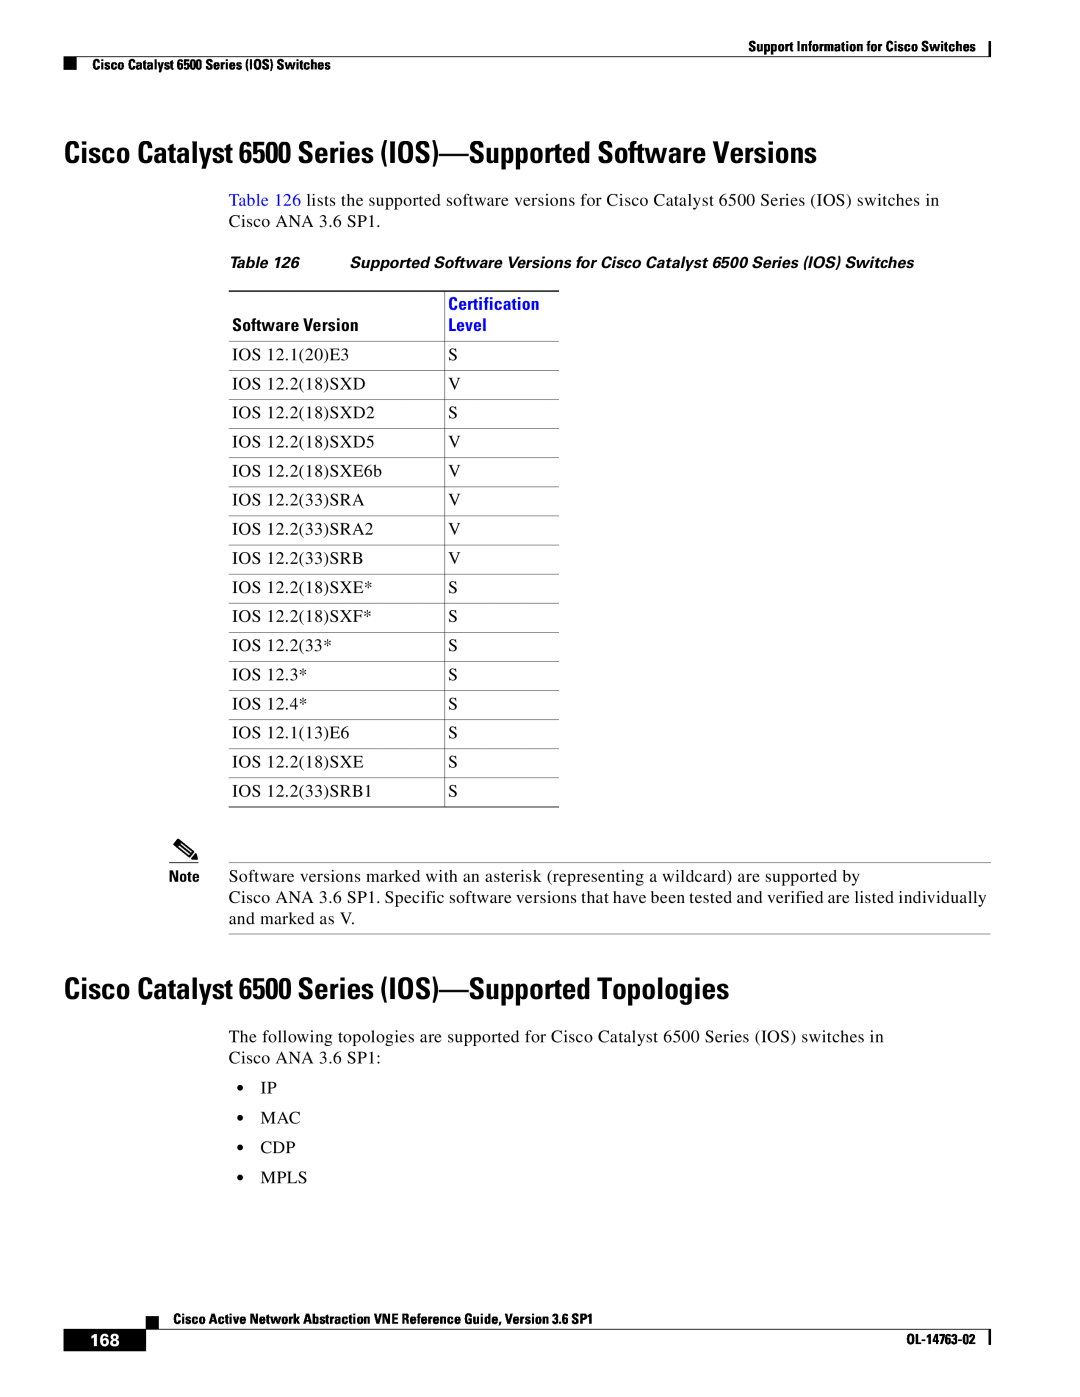 Cisco Systems OL-14763-02 manual Cisco Catalyst 6500 Series IOS-Supported Software Versions 